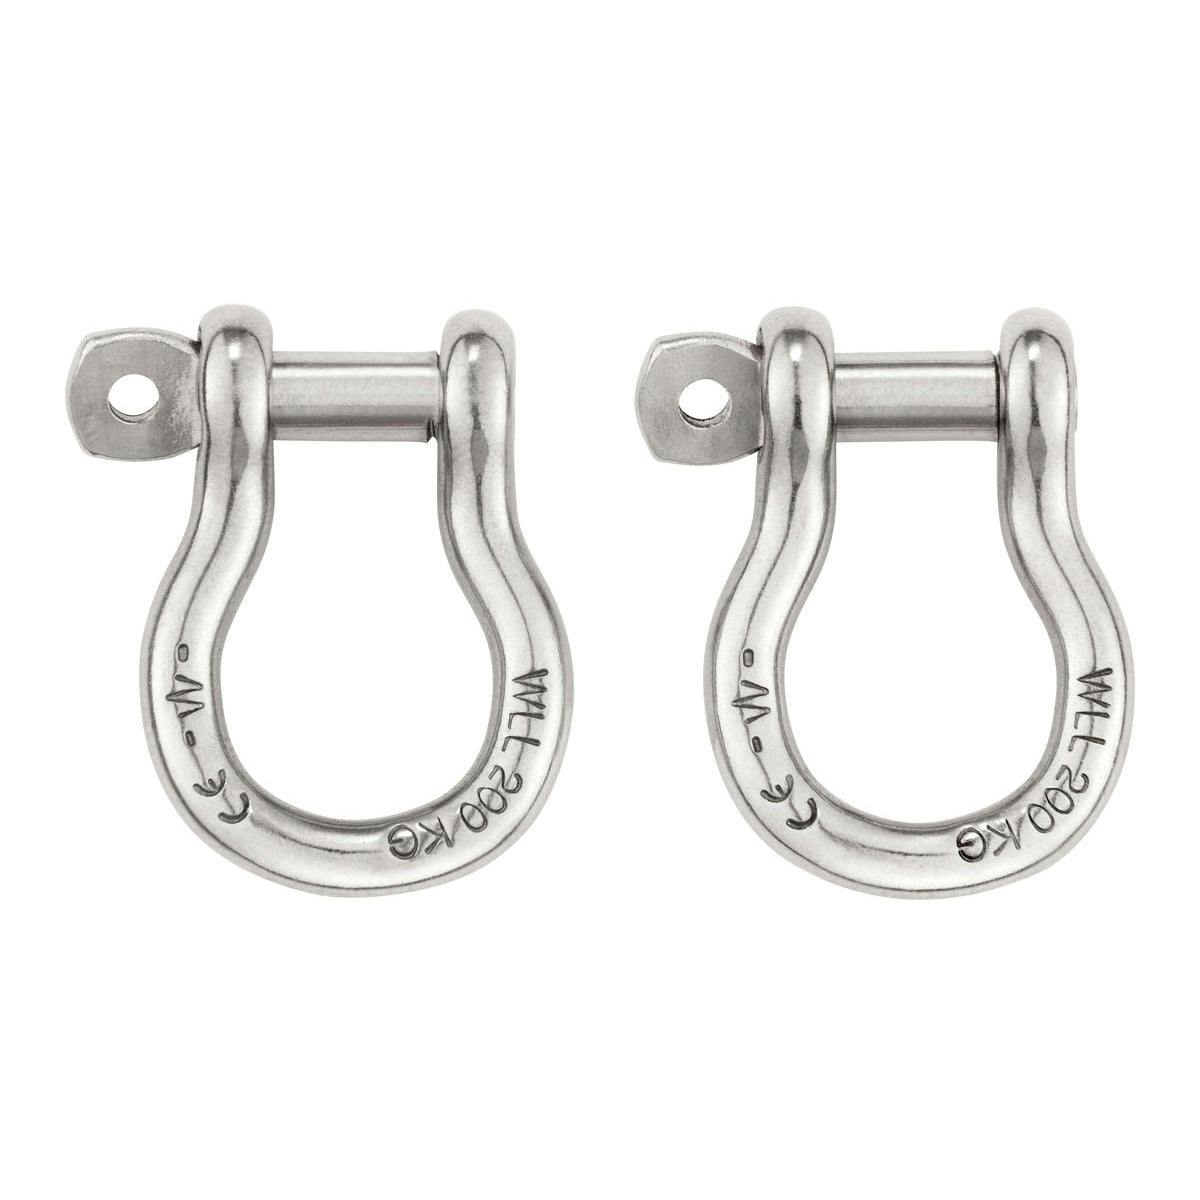 Petzl 2 Shackles For Astro Harness